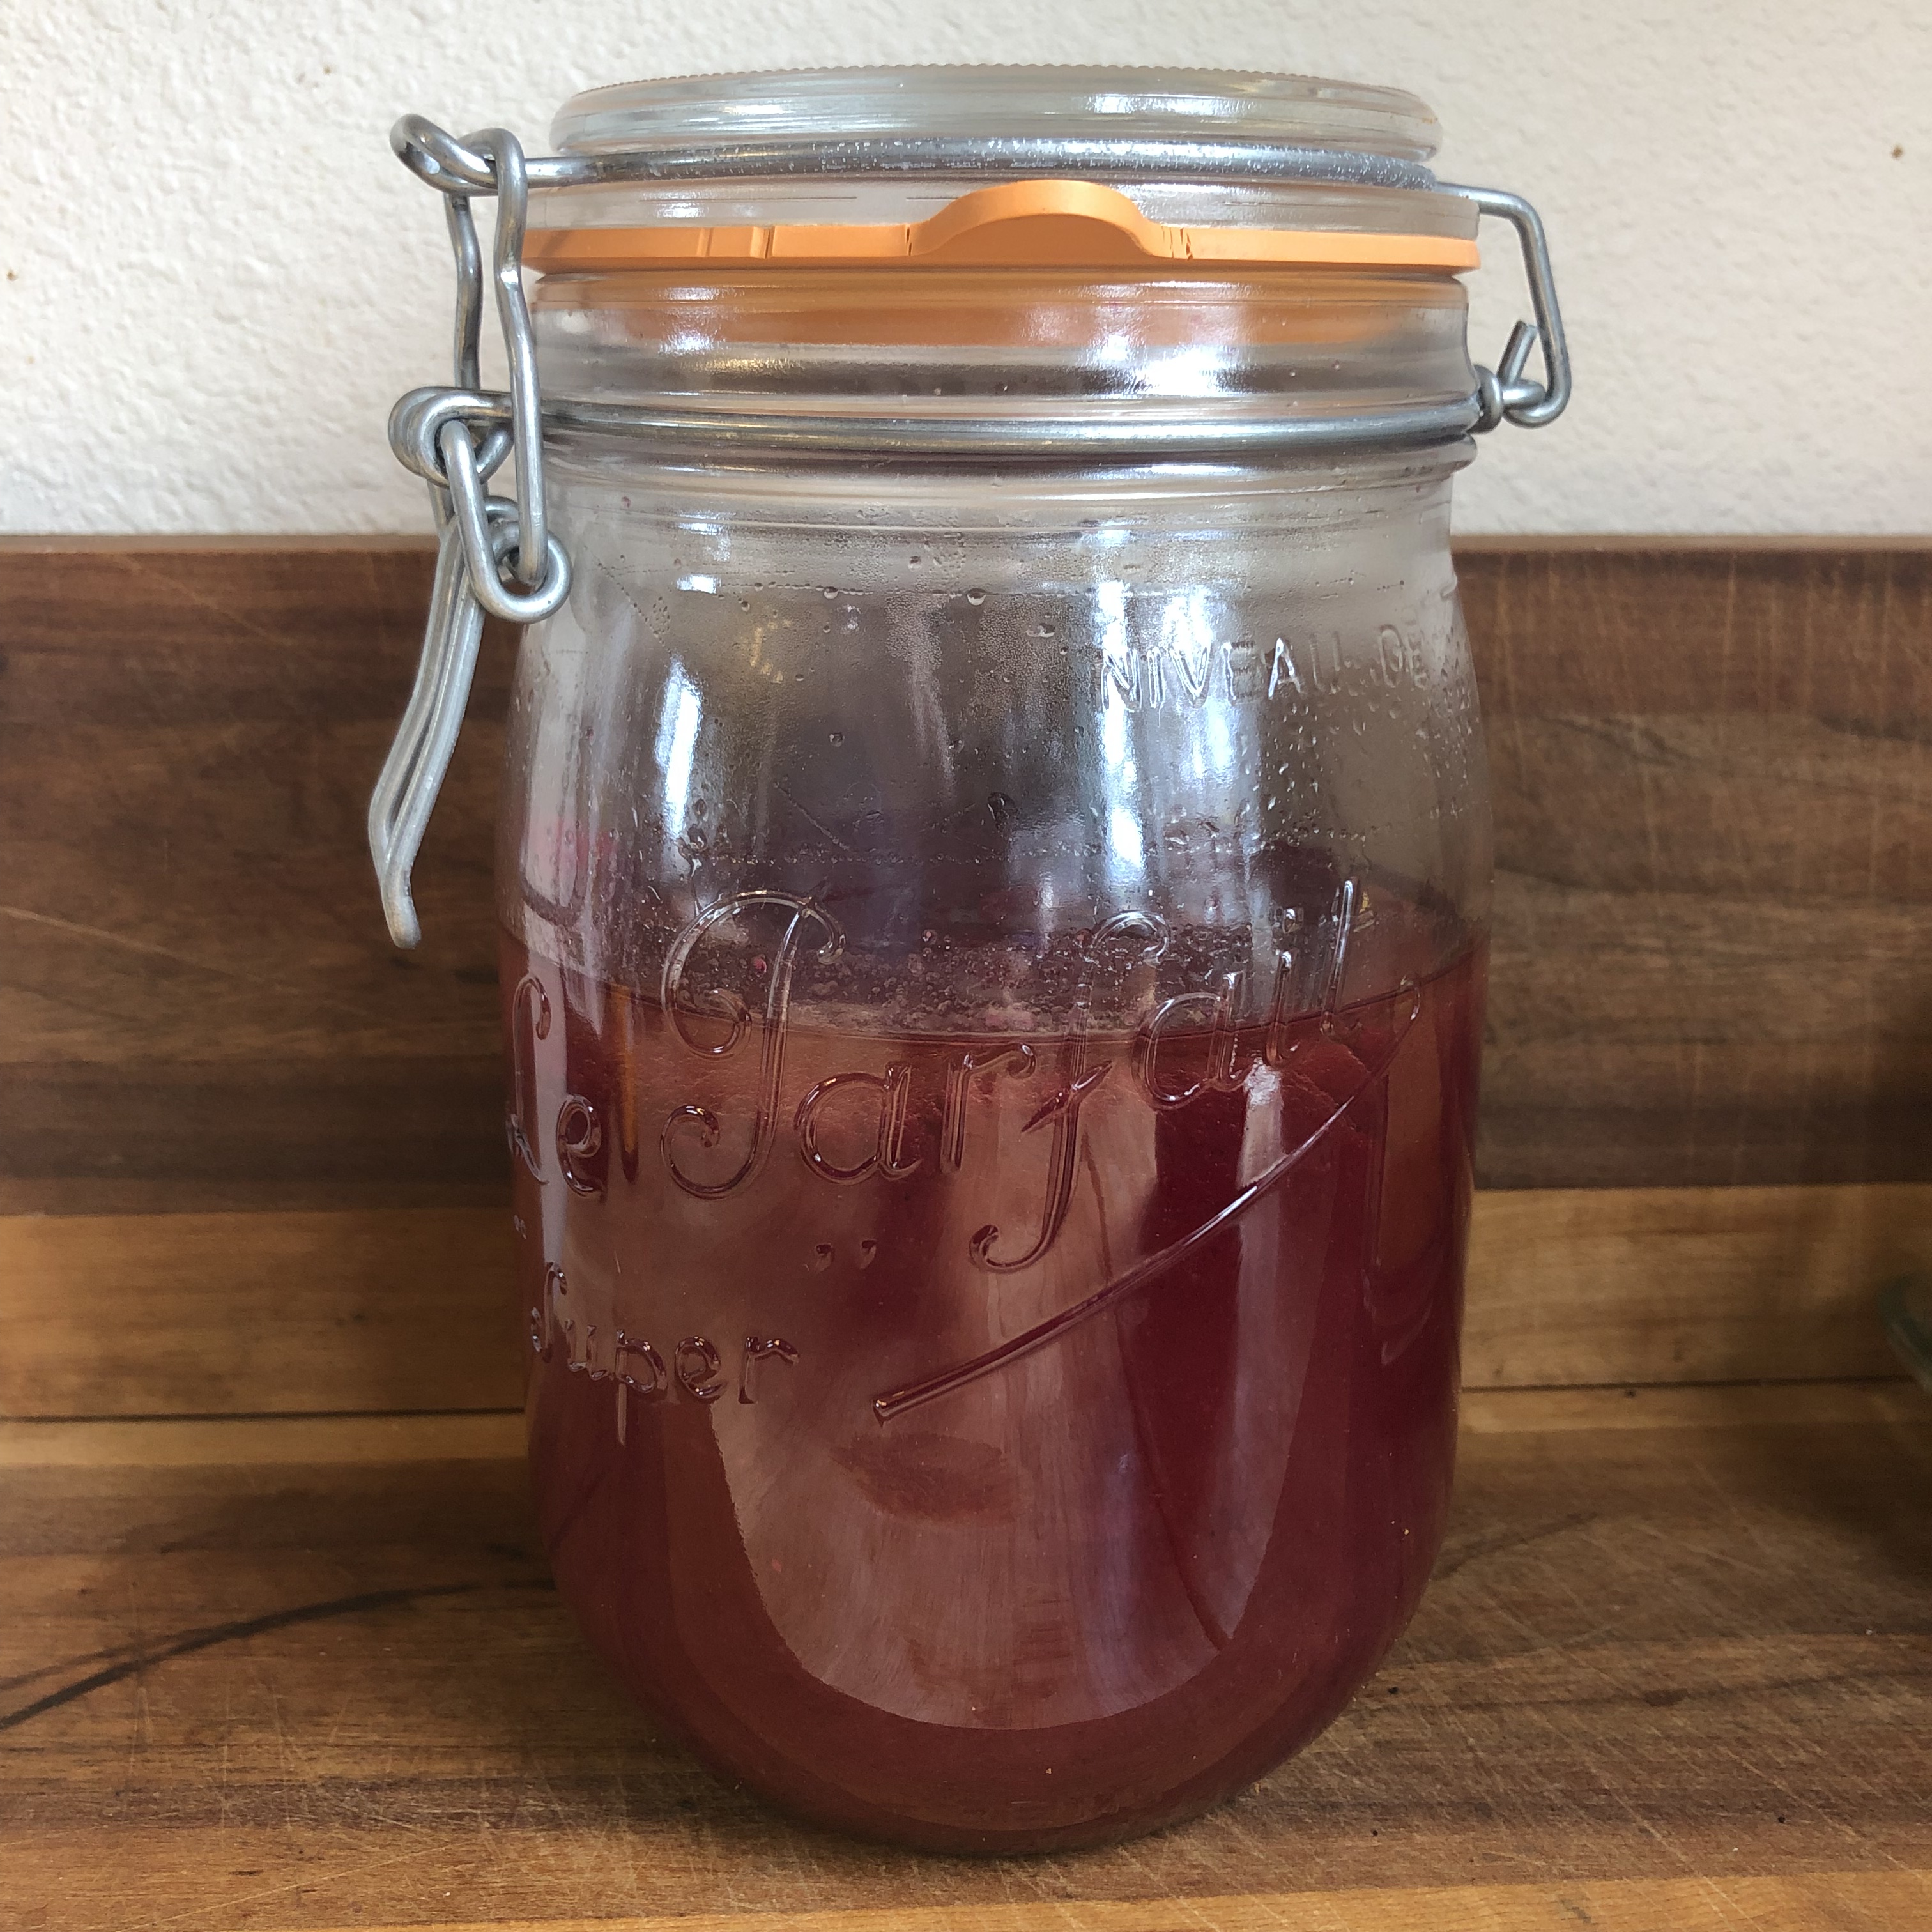 Fermented Red Sauce (Nightshade-Free Ketchup)